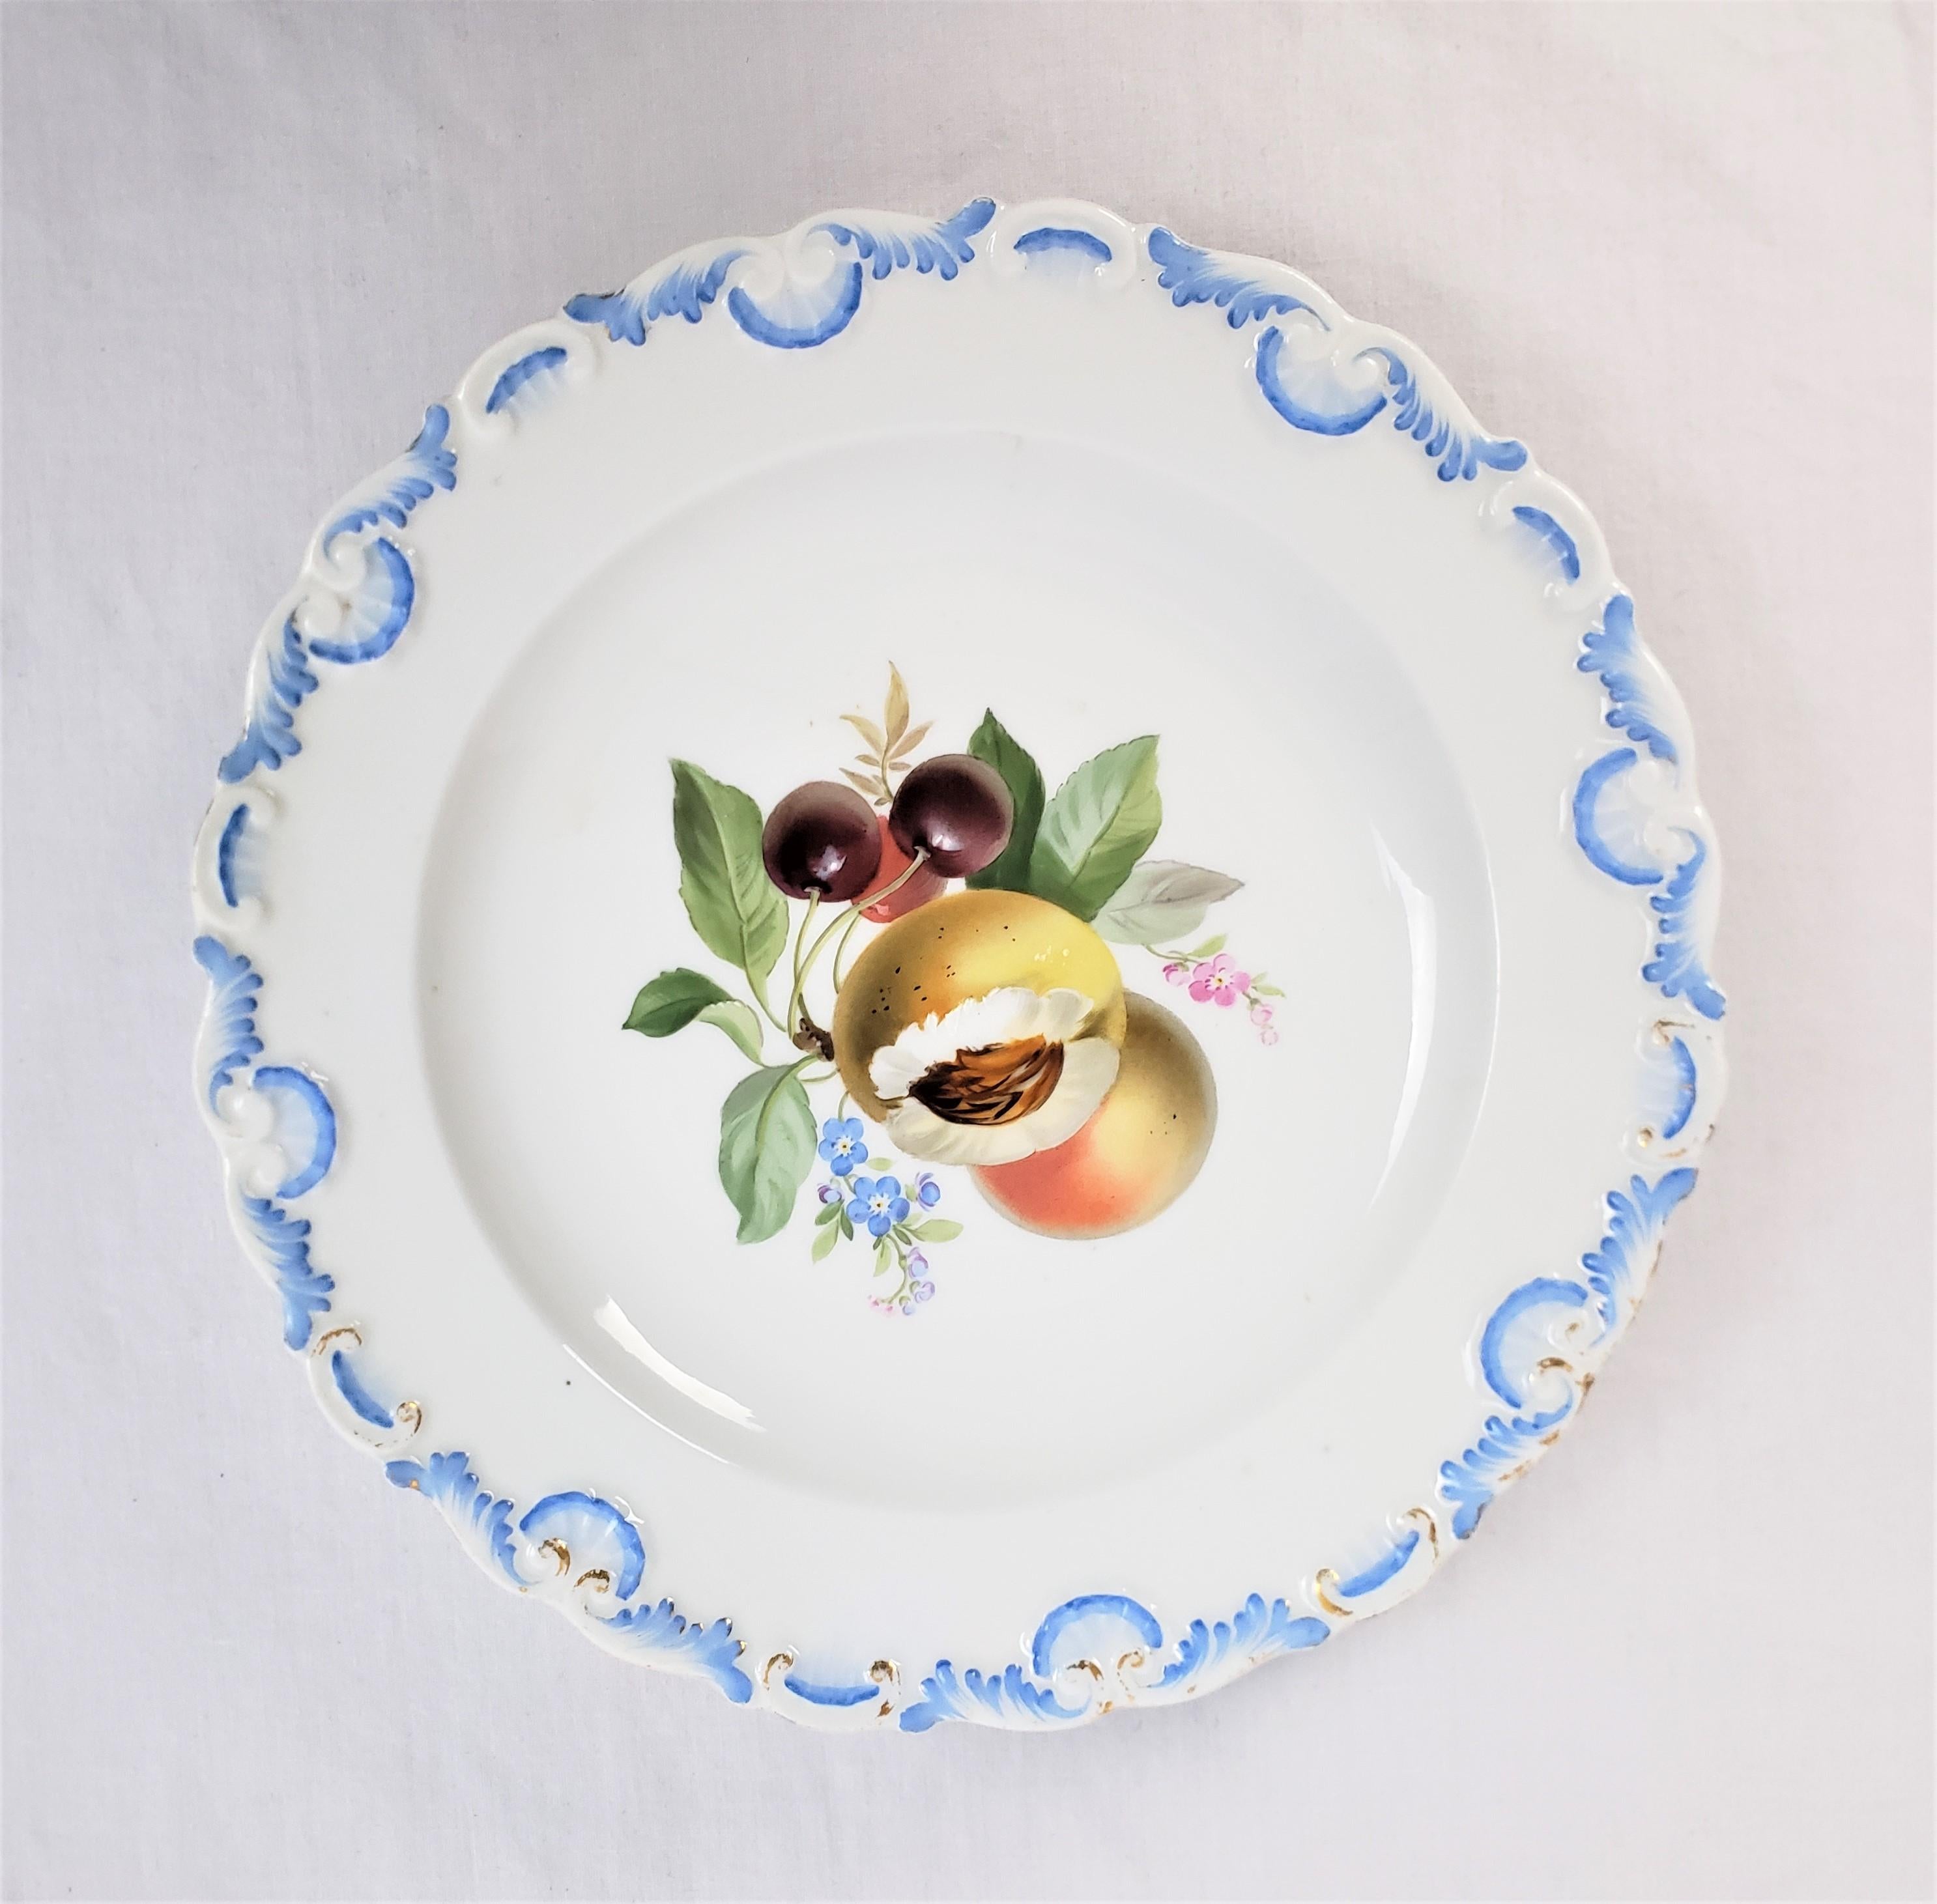 Molded Antique Meissen Set of 13 Hand-Painted Desert Plates with Fruit Decoration For Sale